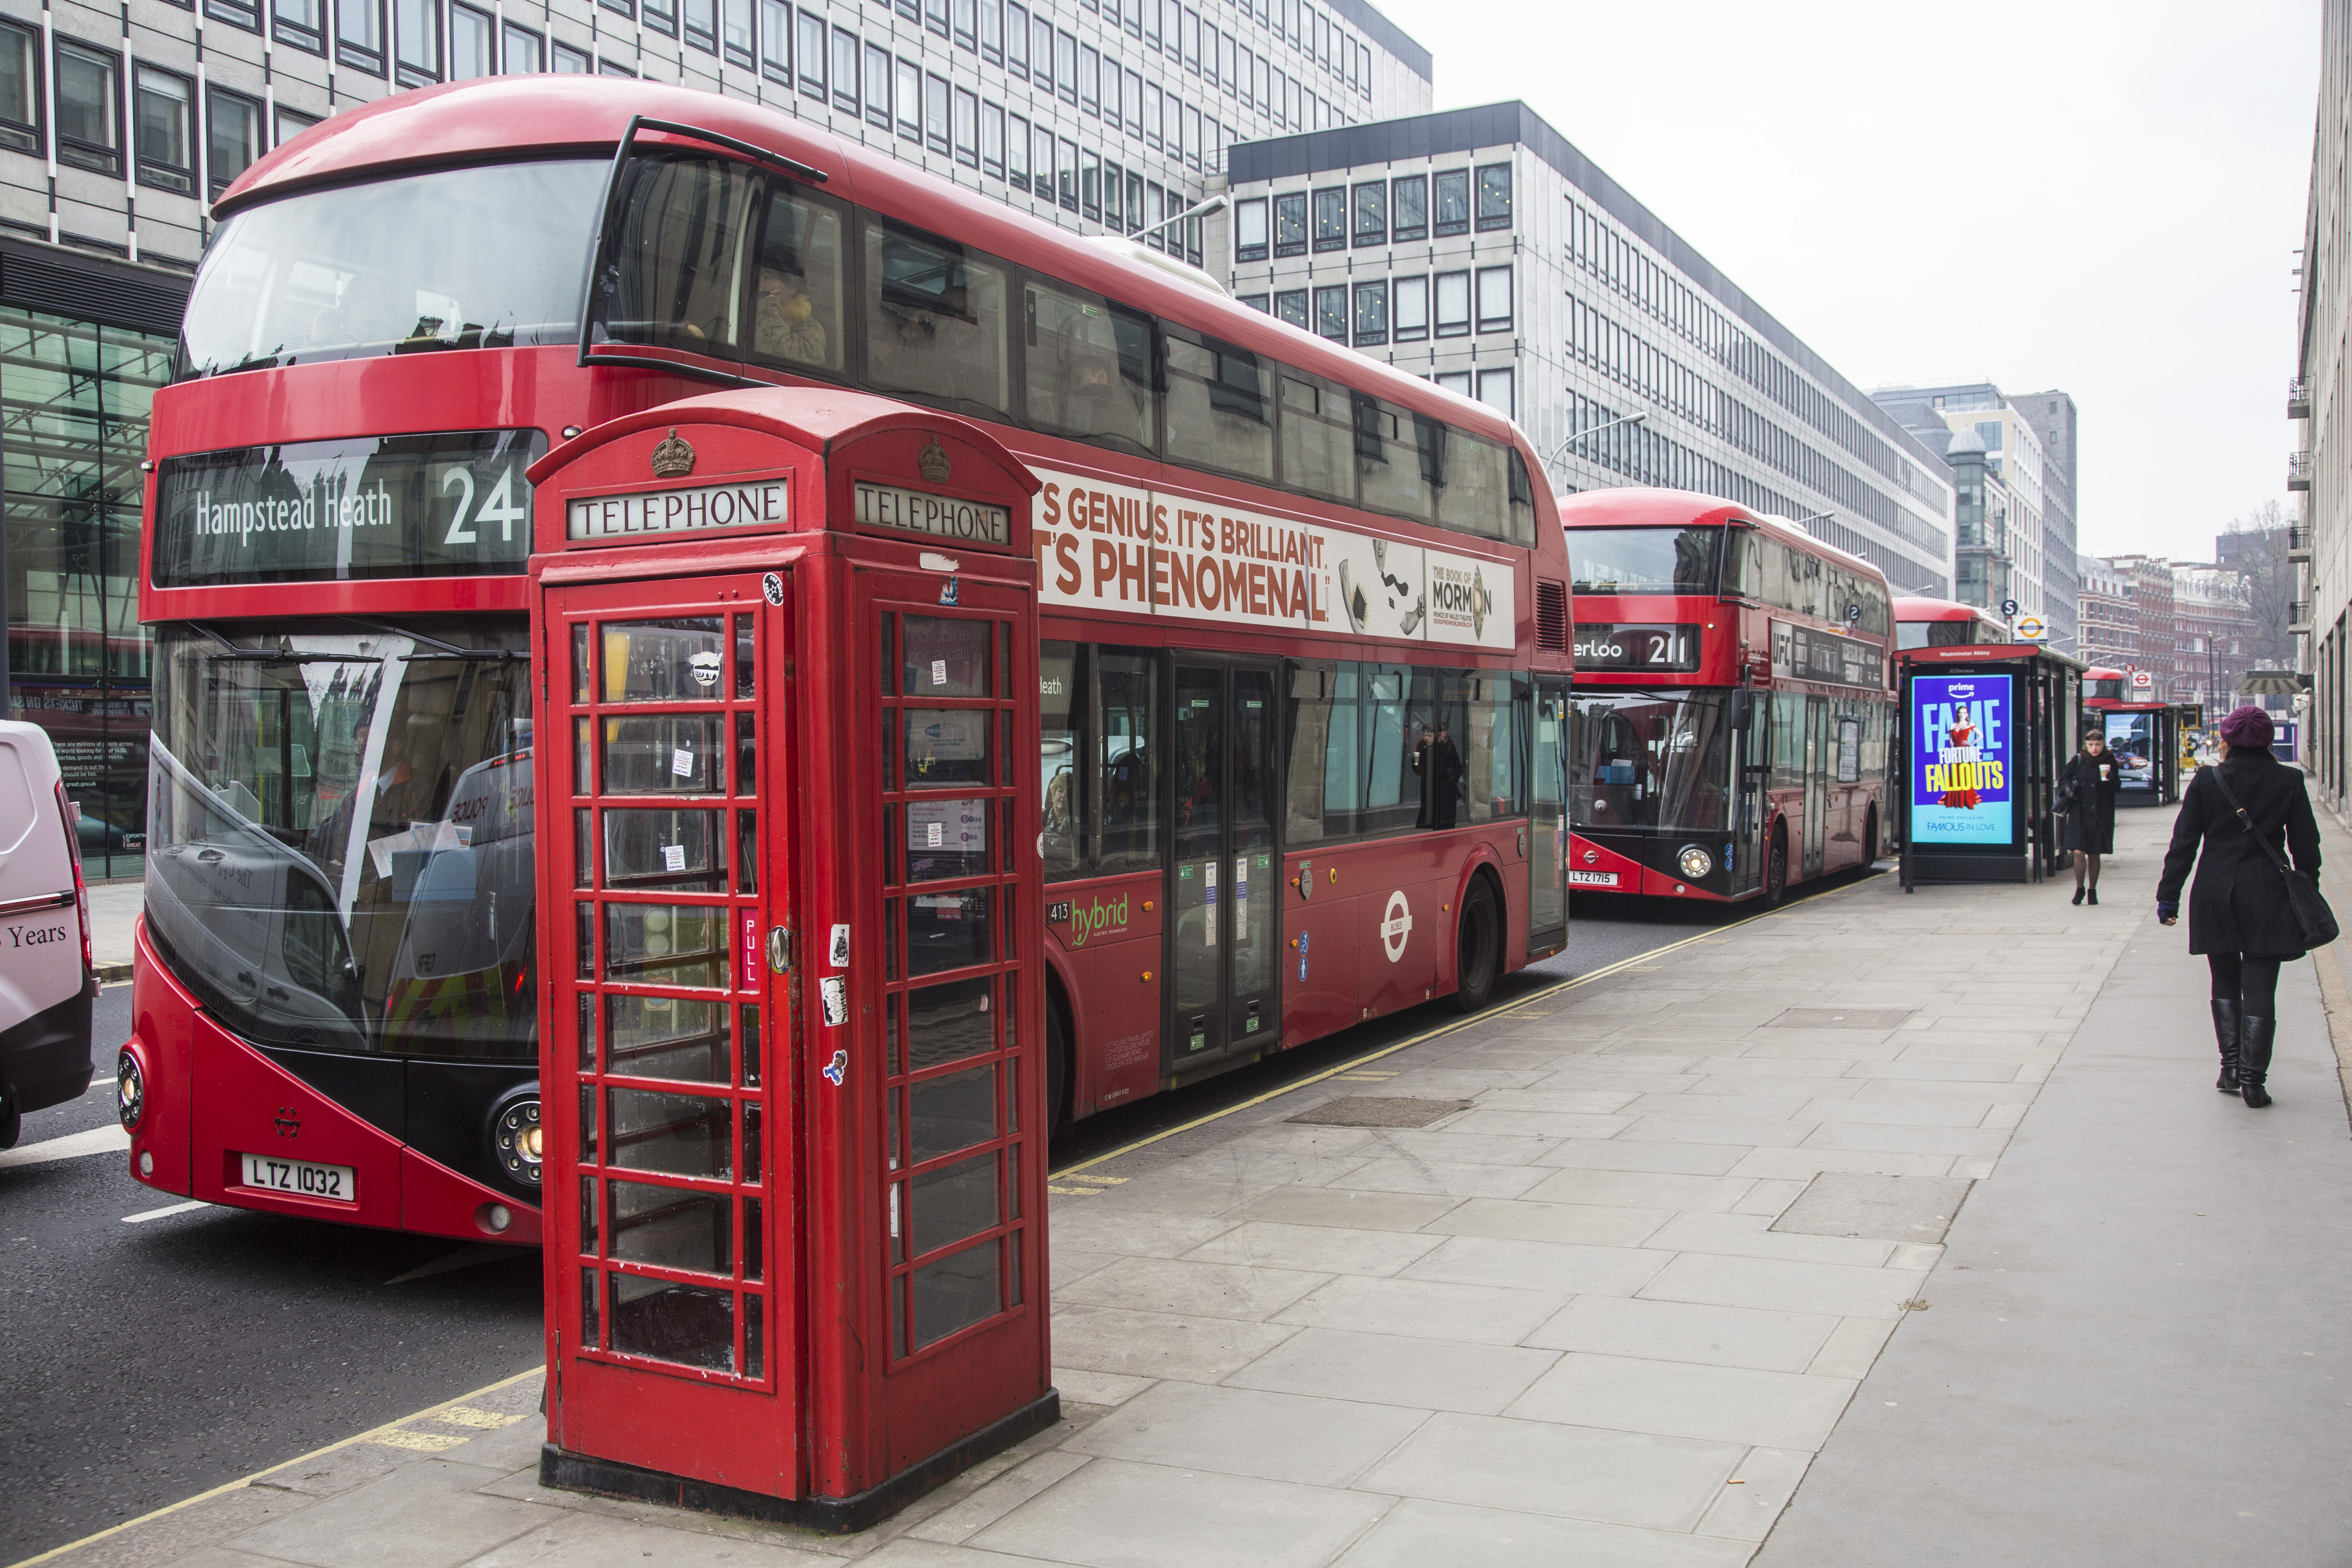 The new iconic buses in the streets of London